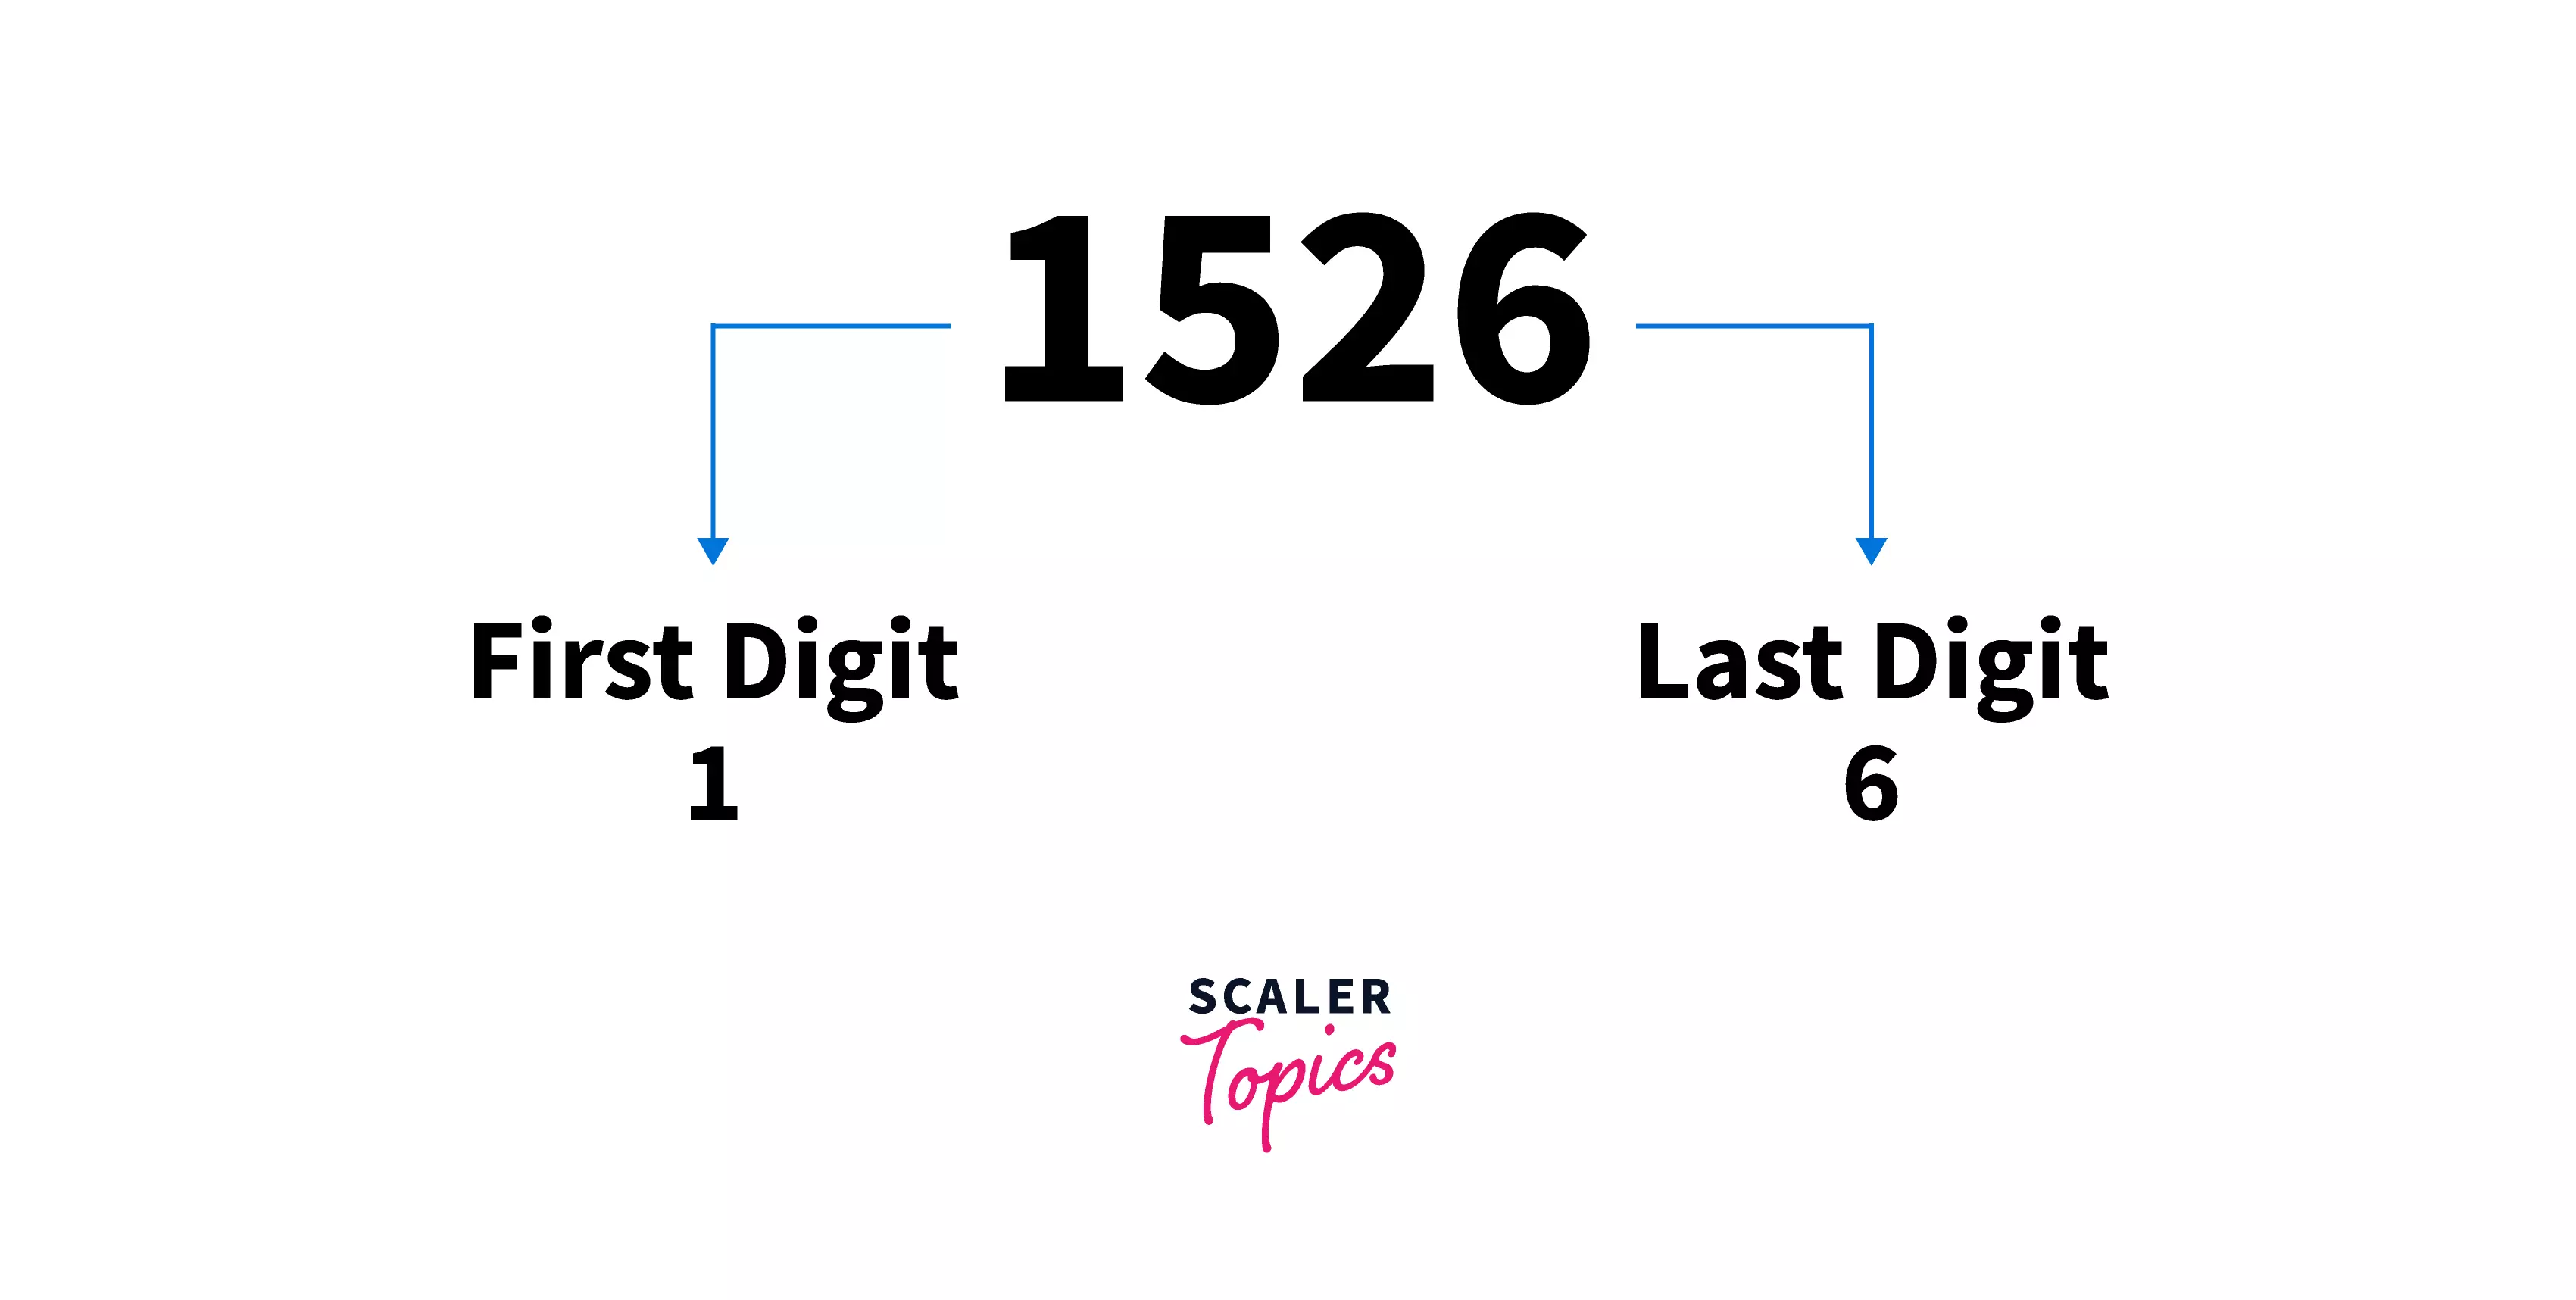 C++ Program to Find the First and Last Digits of a Number - Scaler Topics